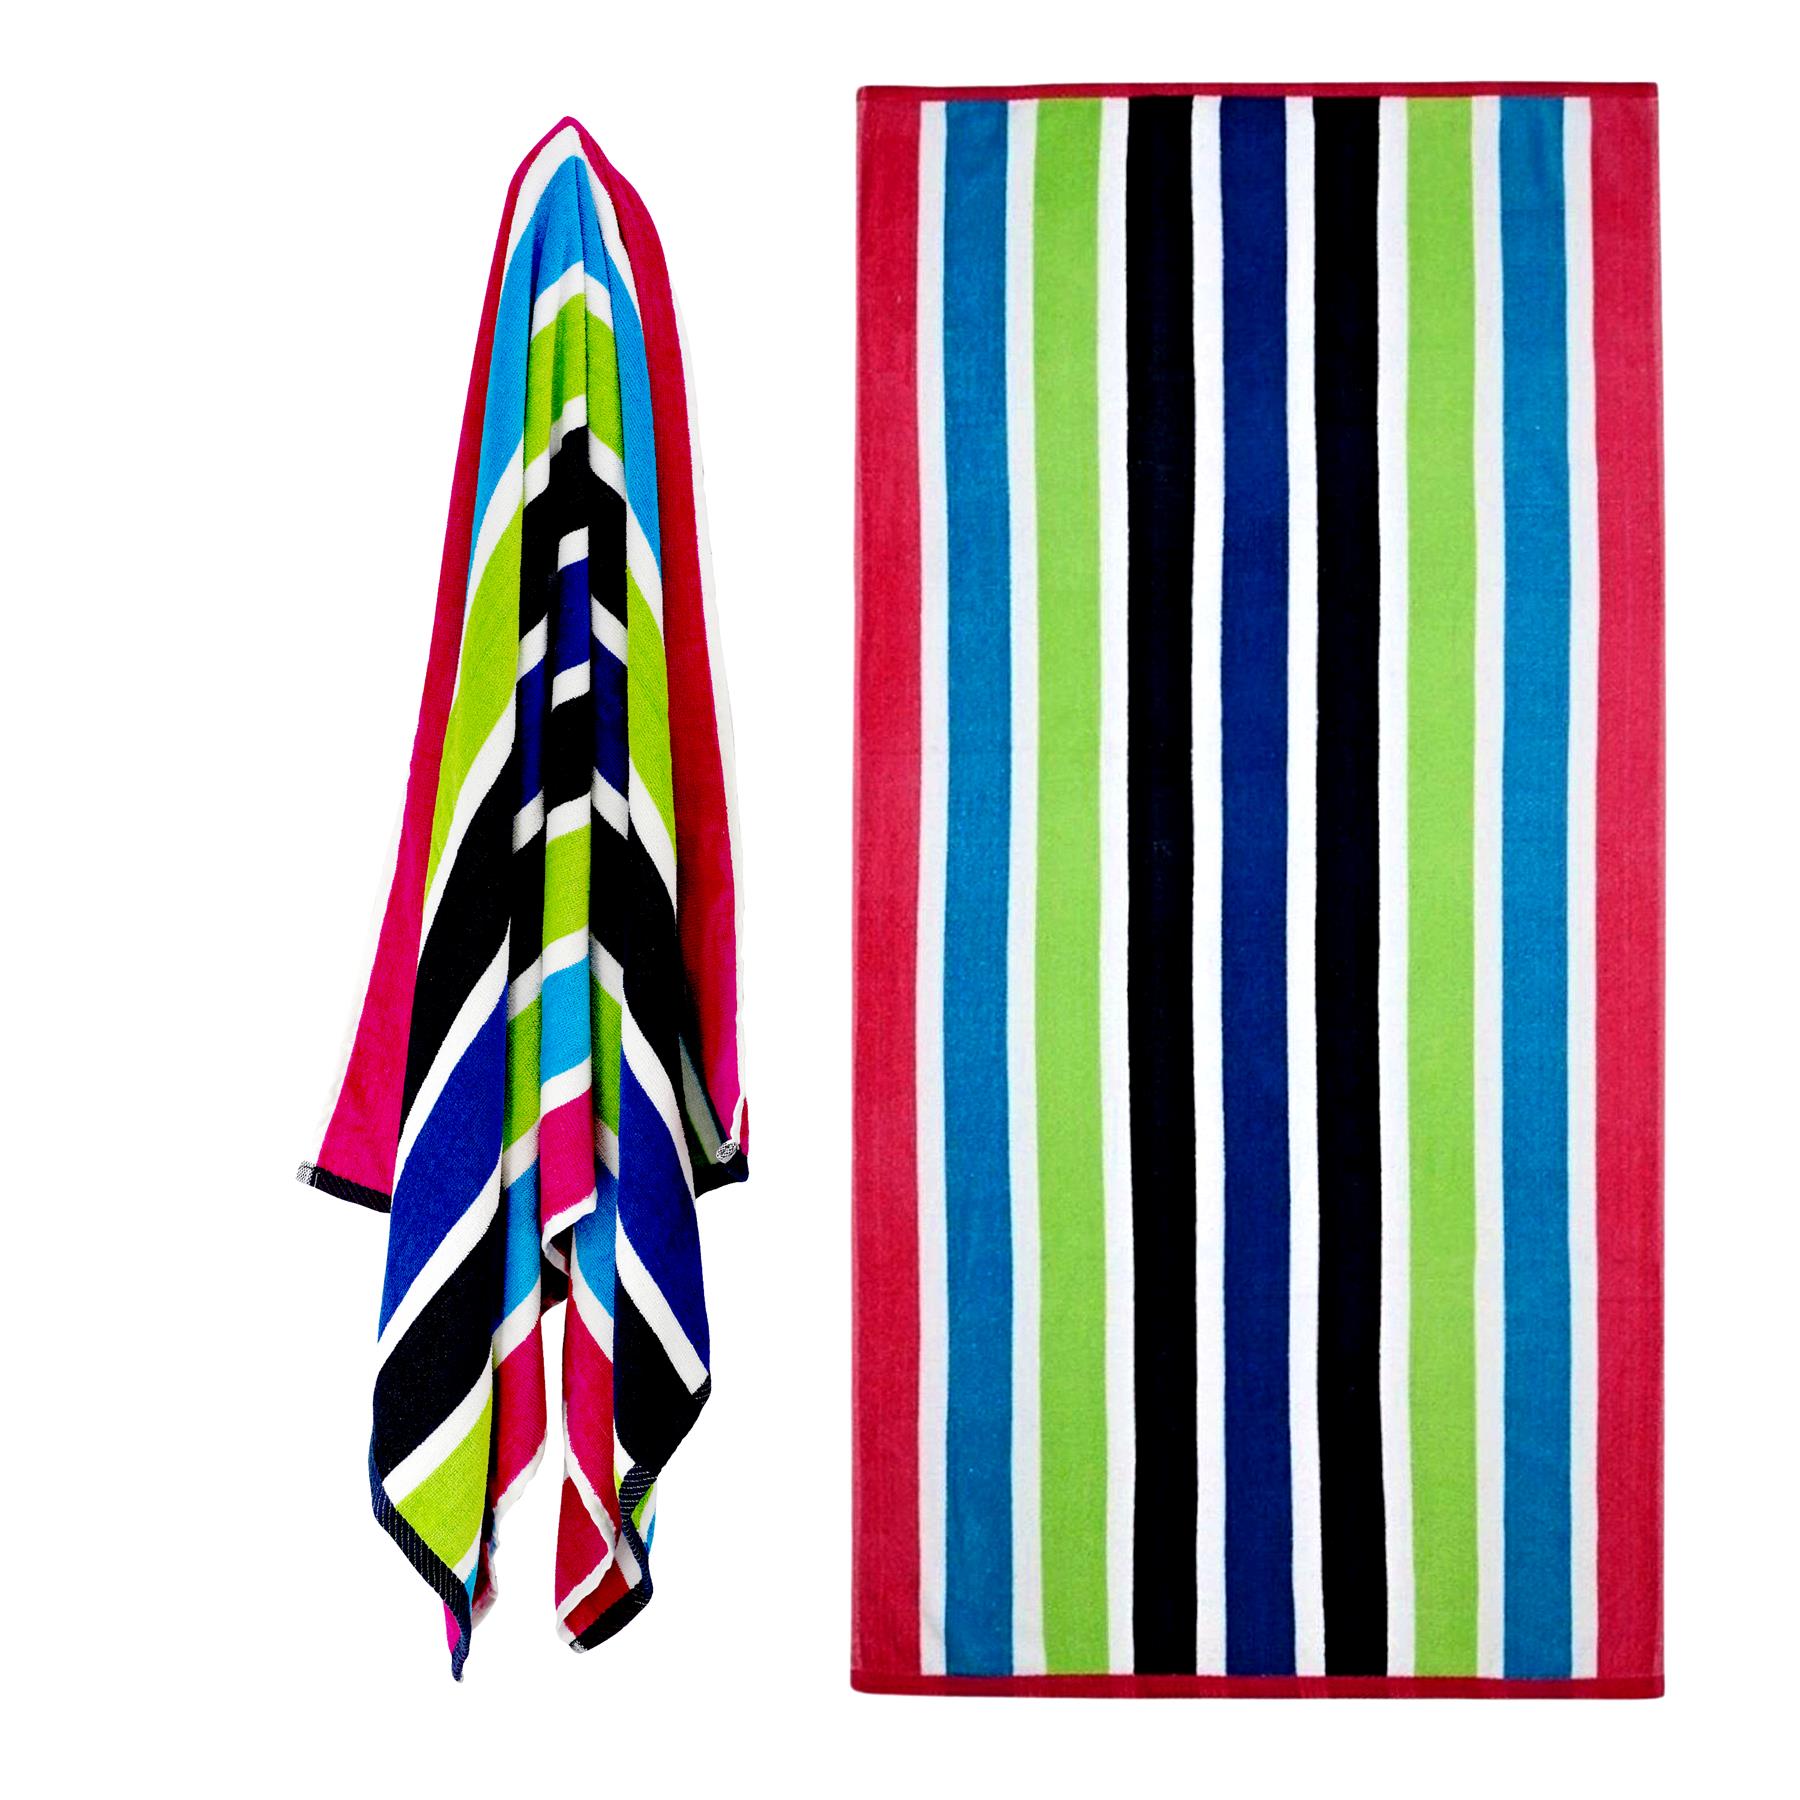 Large Velour Striped Beach Towel (Sanguine) by Geezy - The Magic Toy Shop